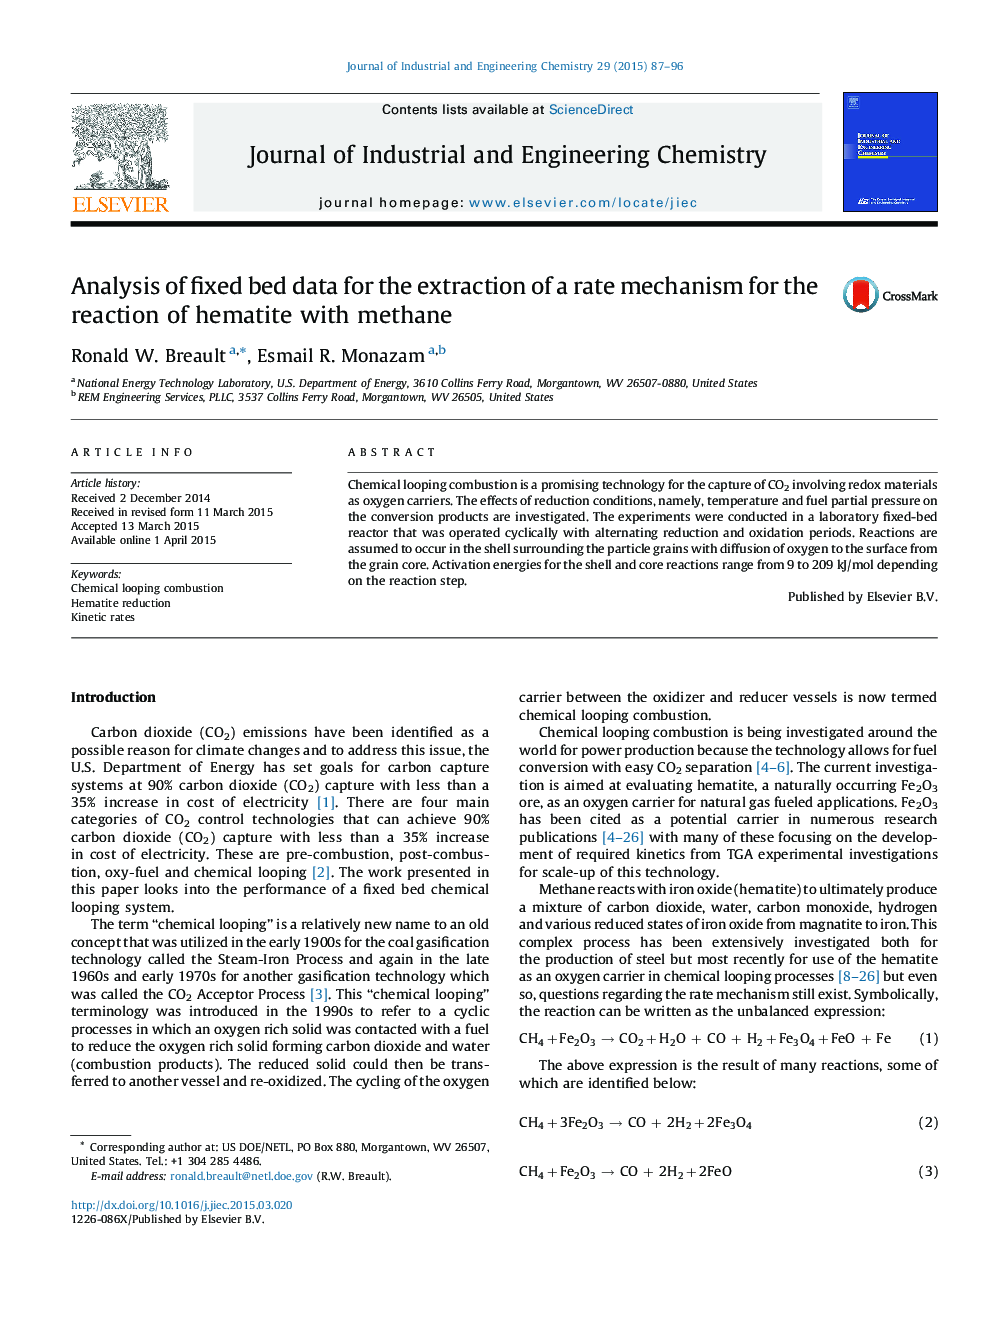 Analysis of fixed bed data for the extraction of a rate mechanism for the reaction of hematite with methane